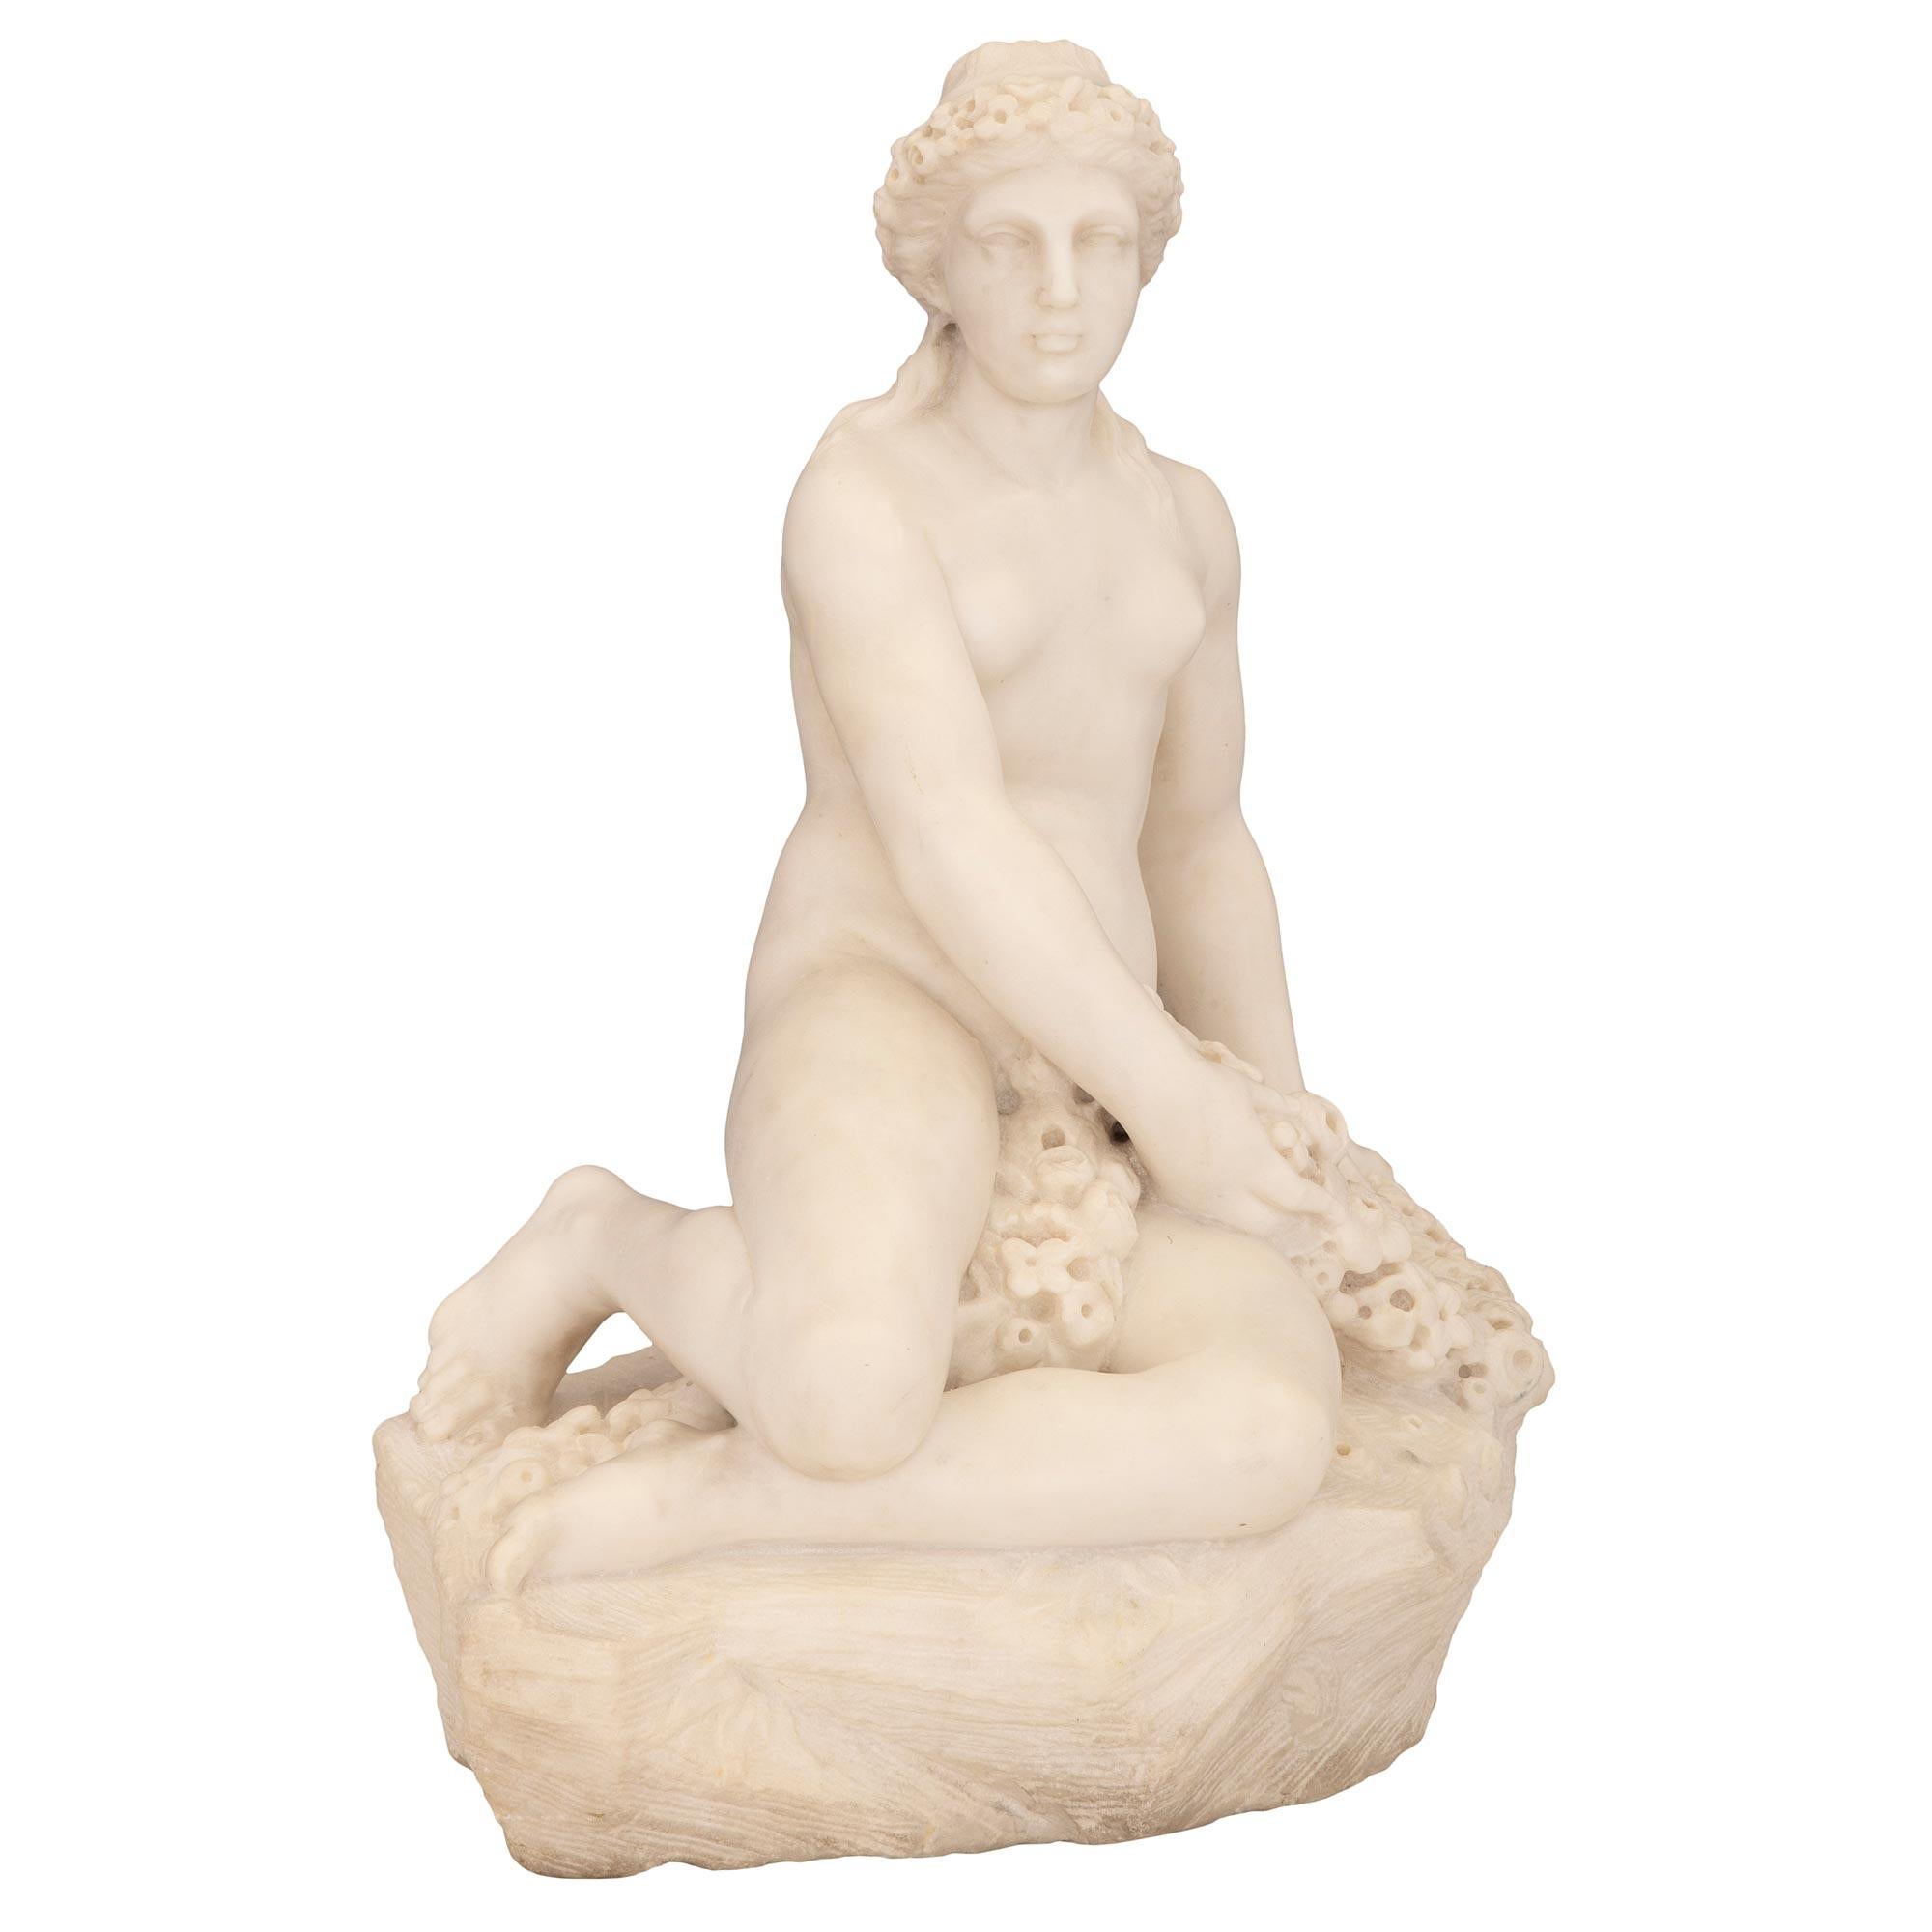 A stunning and extremely high quality Italian 19th century white Carrara marble statue. The wonderfully executed statue depicts a beautiful young lady sitting on cut tree with a woven basket full of fresh cut blooming flowers. She is making a